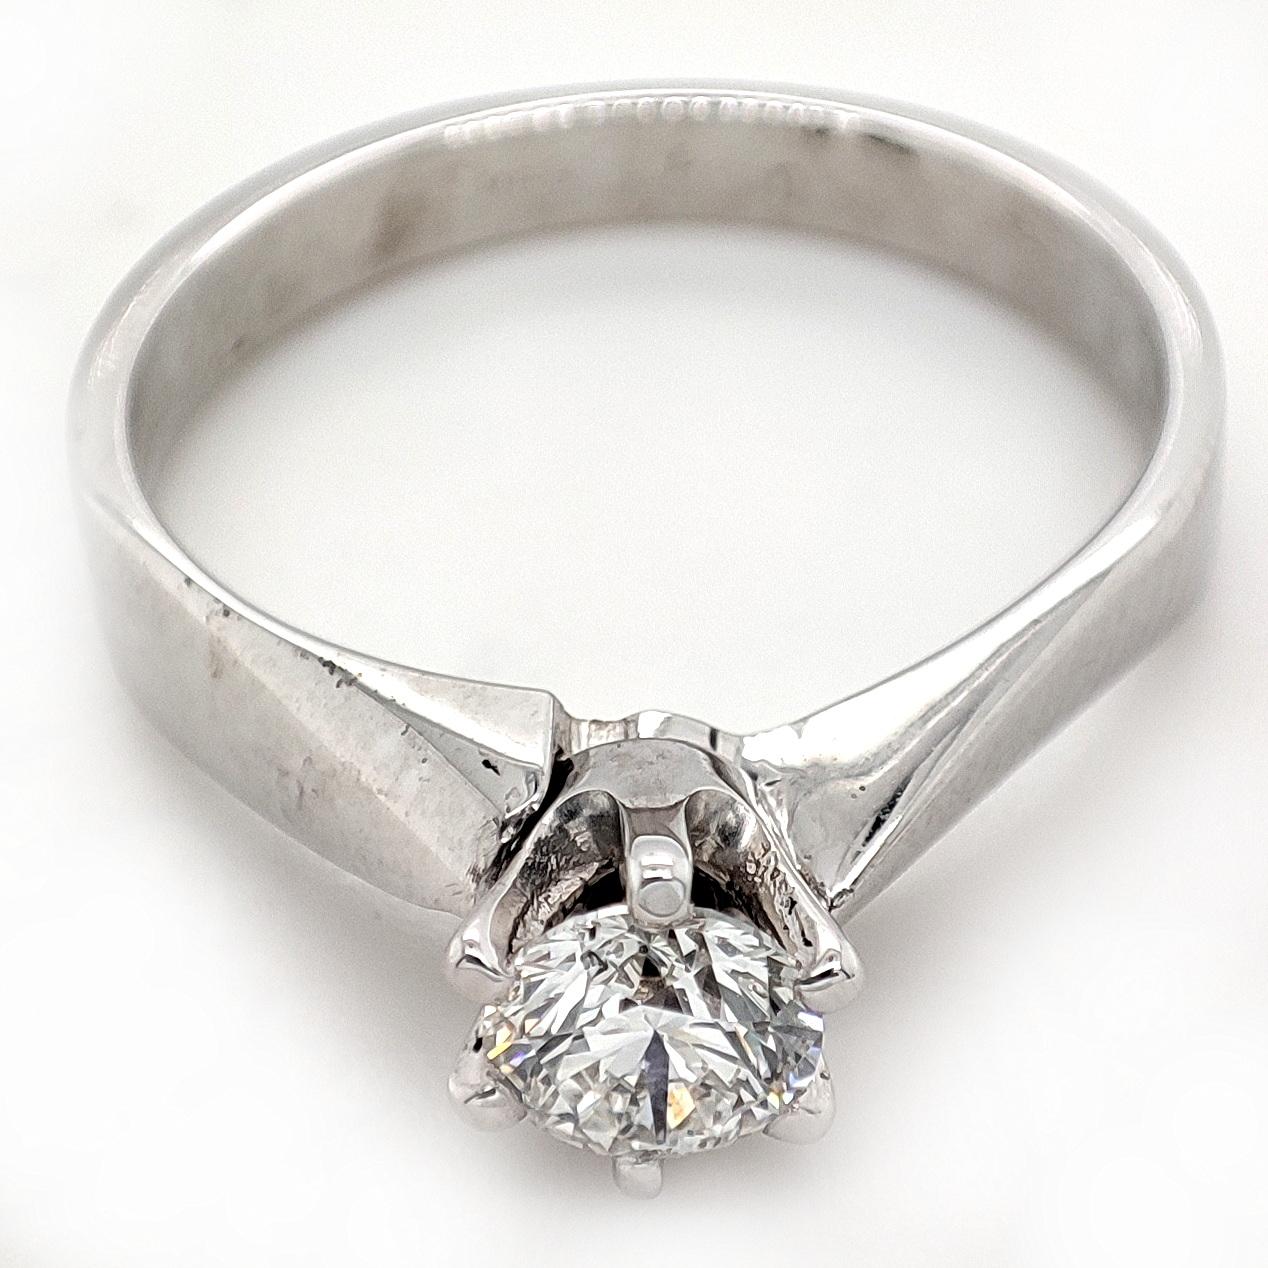 FOR US CUSTOMER NO VAT!

This elegant ring features a dazzling 0.50 carat diamond with exceptional clarity SI1 and a brilliant. The diamond is set in a classic 14K white gold band, adding a touch of timeless sophistication.

With a size of 7.25 US,